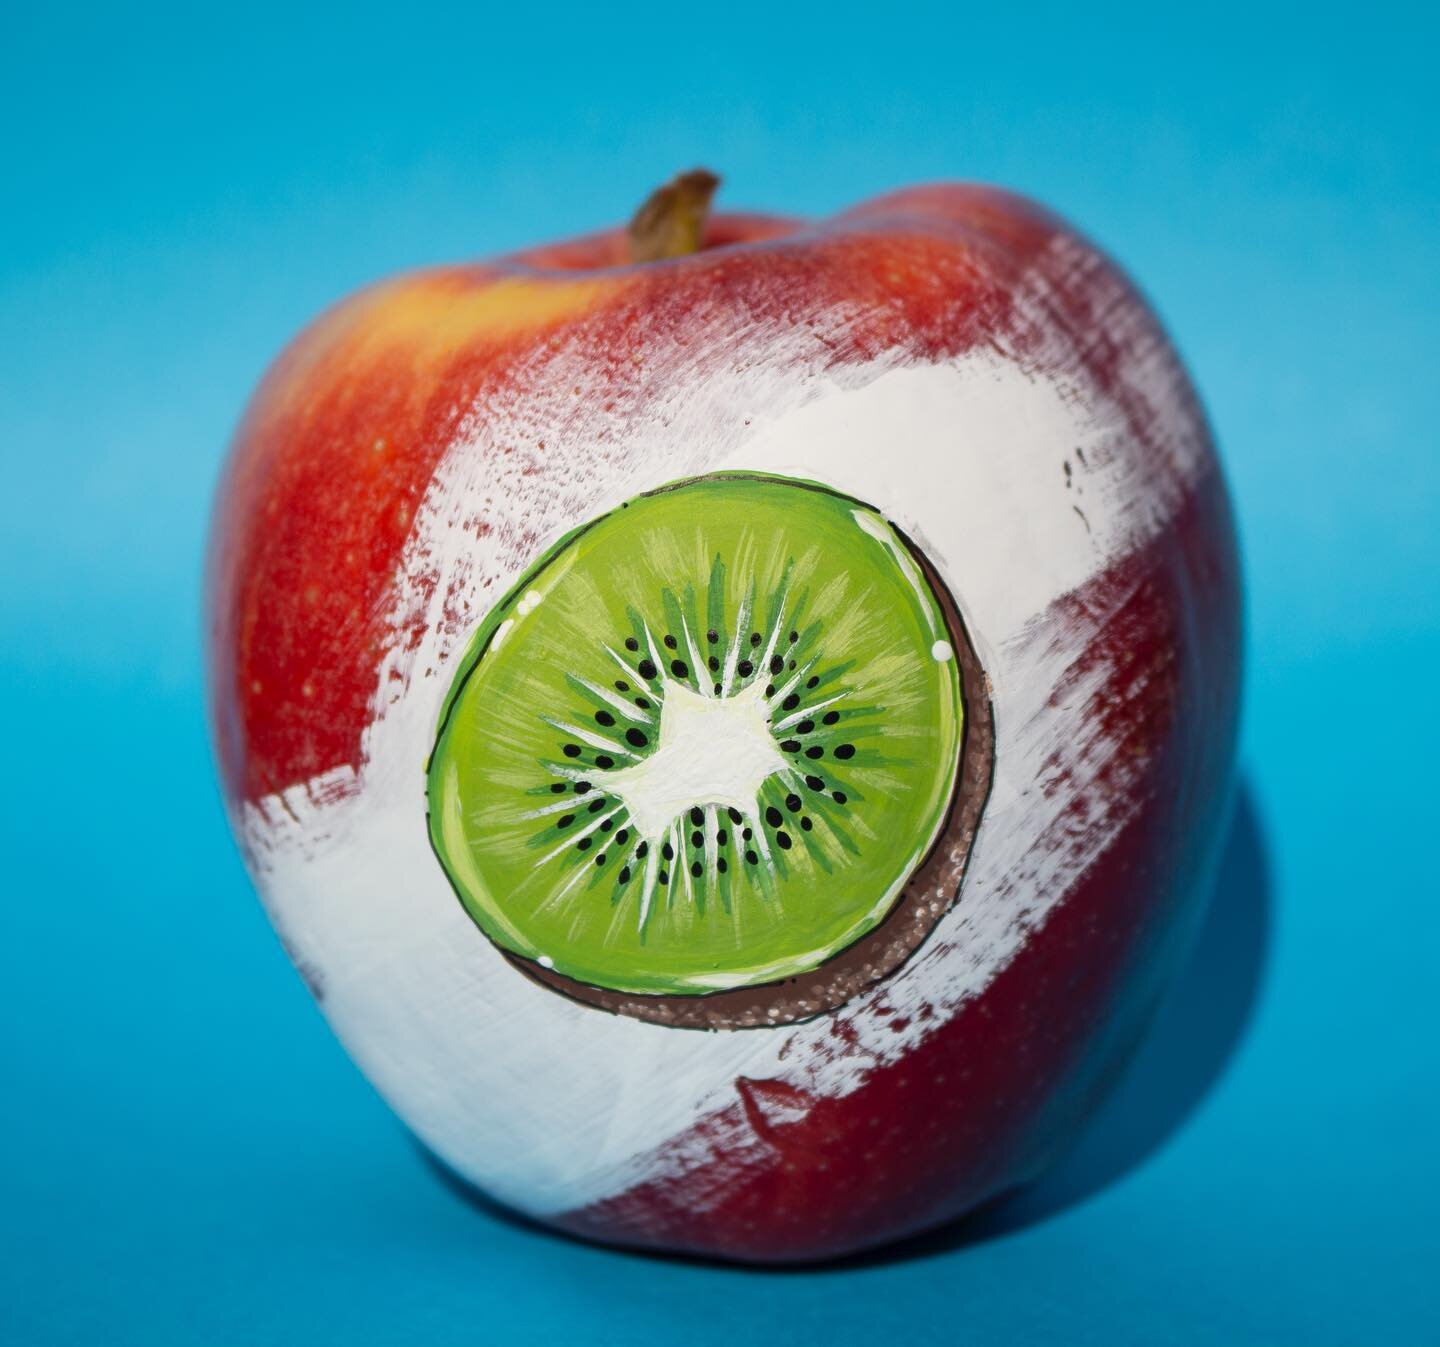 This project was so fun! A kiwi on an apple. I really enjoyed changing the meaning of this fruit. I would love to expand upon this project in some way. 🥝 🍎 
.
.
.
.
.
#kiwiart #paintedfruit #kiwiarts #appleart #apple #kiwi #stilllifephotography #br